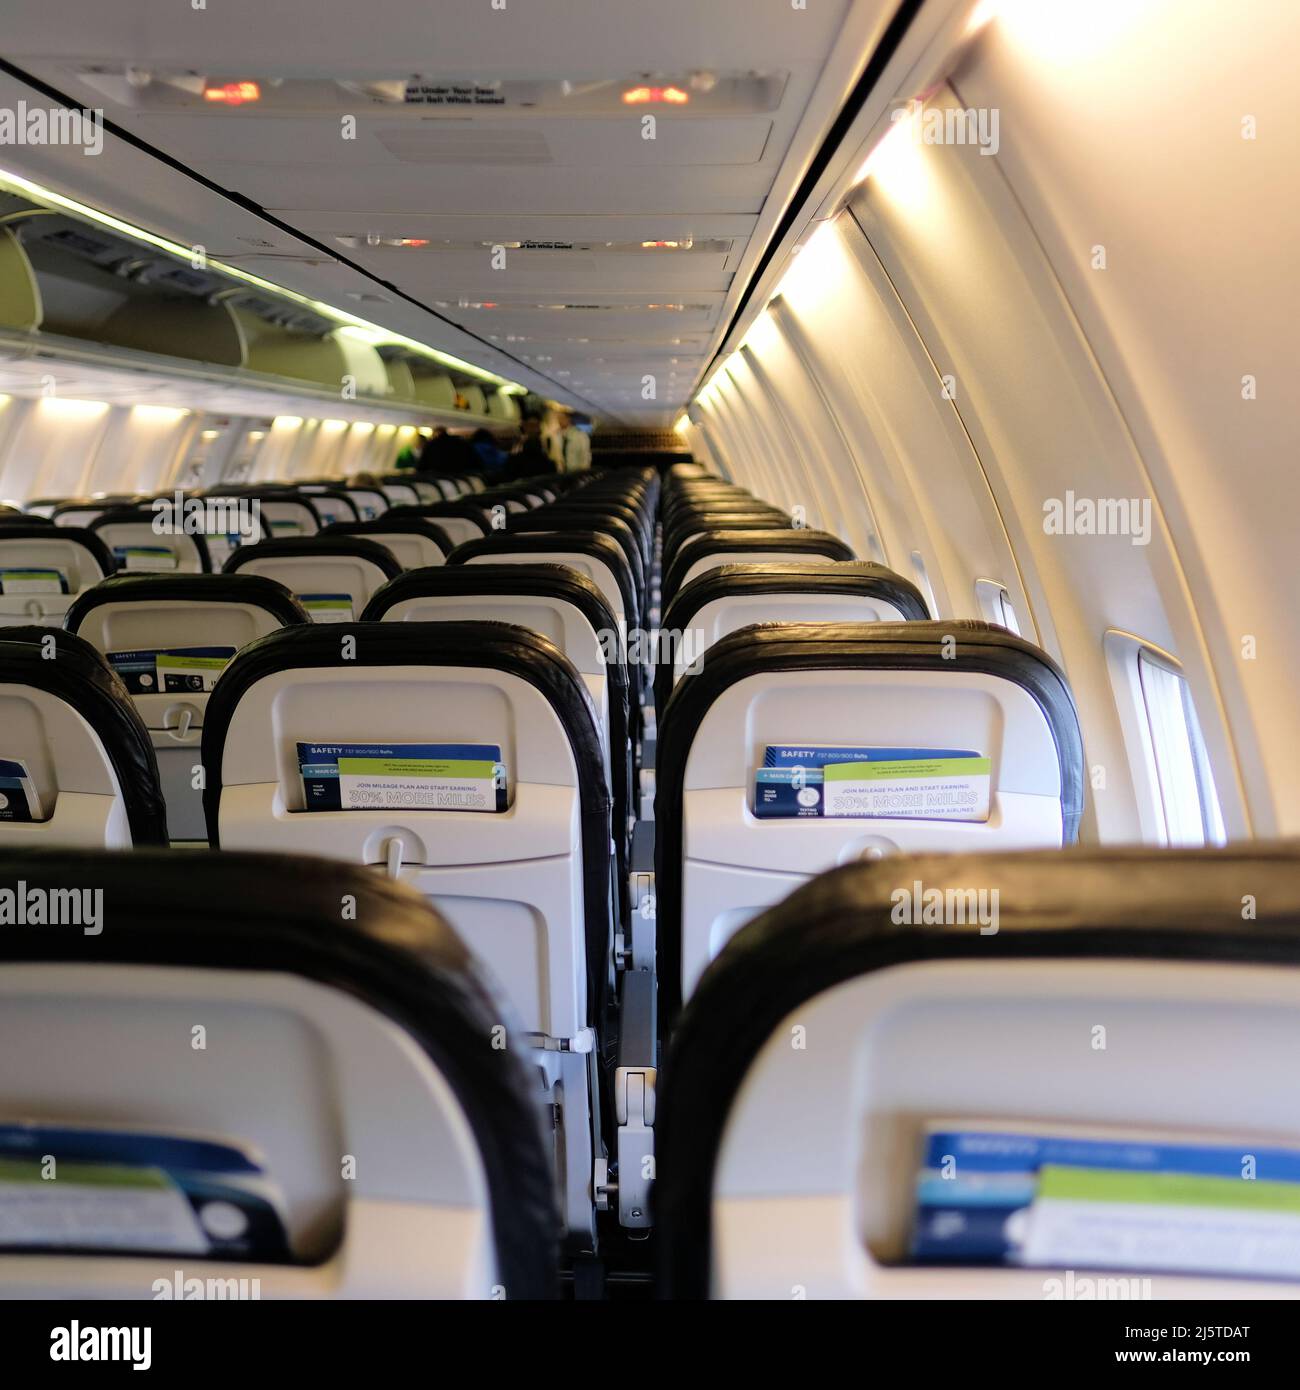 Interior cabin of an Alaska Airlines Boeing 737 with backrests, lighting panel, and passengers blurred in the distance towards the front of the plane. Stock Photo